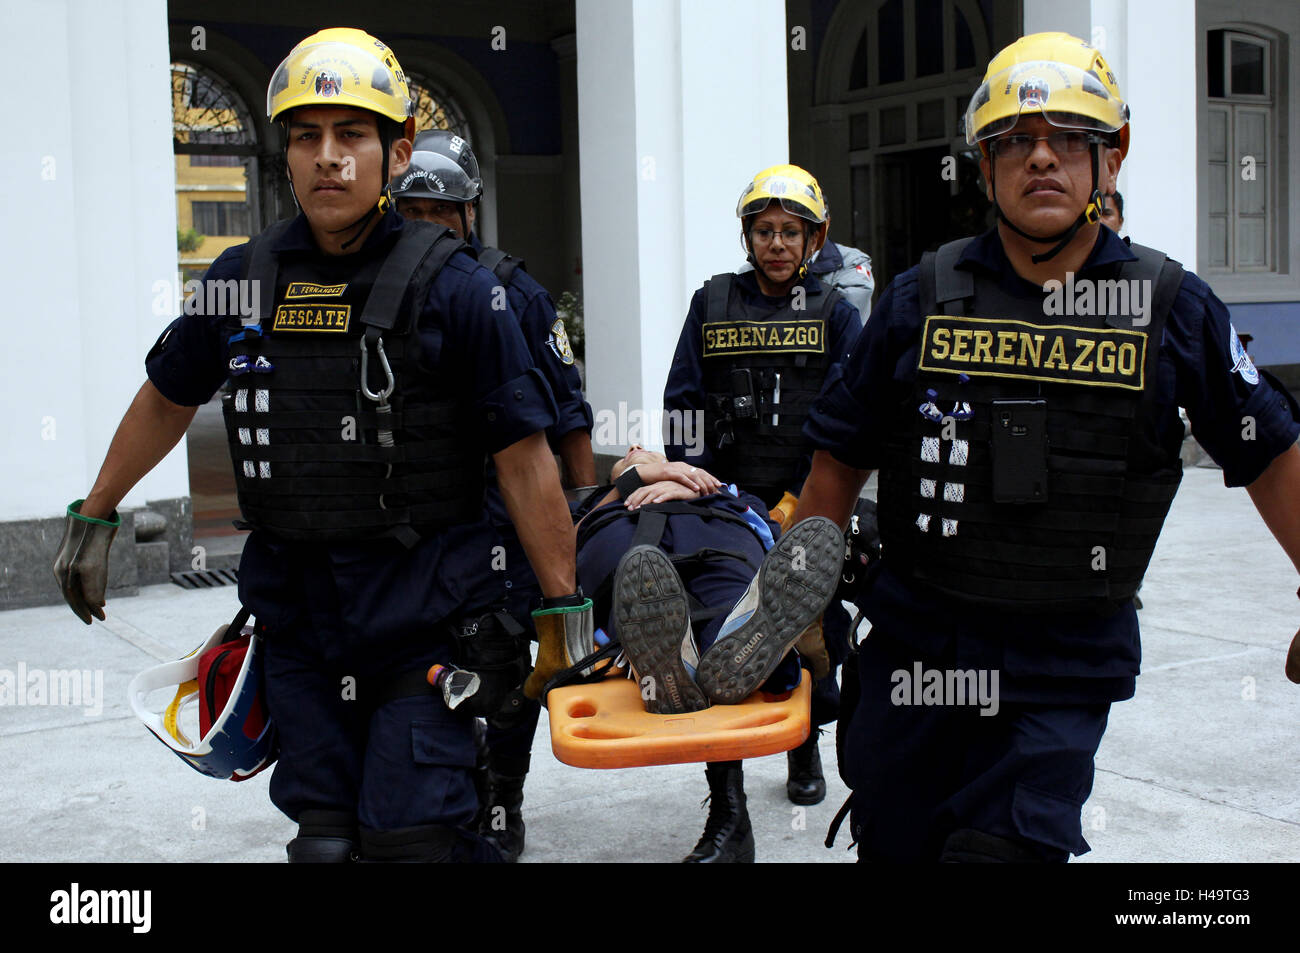 Lima, Peru. 13th Oct, 2016. Members of the 'Serenazgo' Rescue Brigade take part in the 4th National School Earthquake and Tsunami Drill, which is organized by the Education Ministry of Peru, in Lima, capital of Peru, on Oct. 13, 2016. © Luis Camacho/Xinhua/Alamy Live News Stock Photo